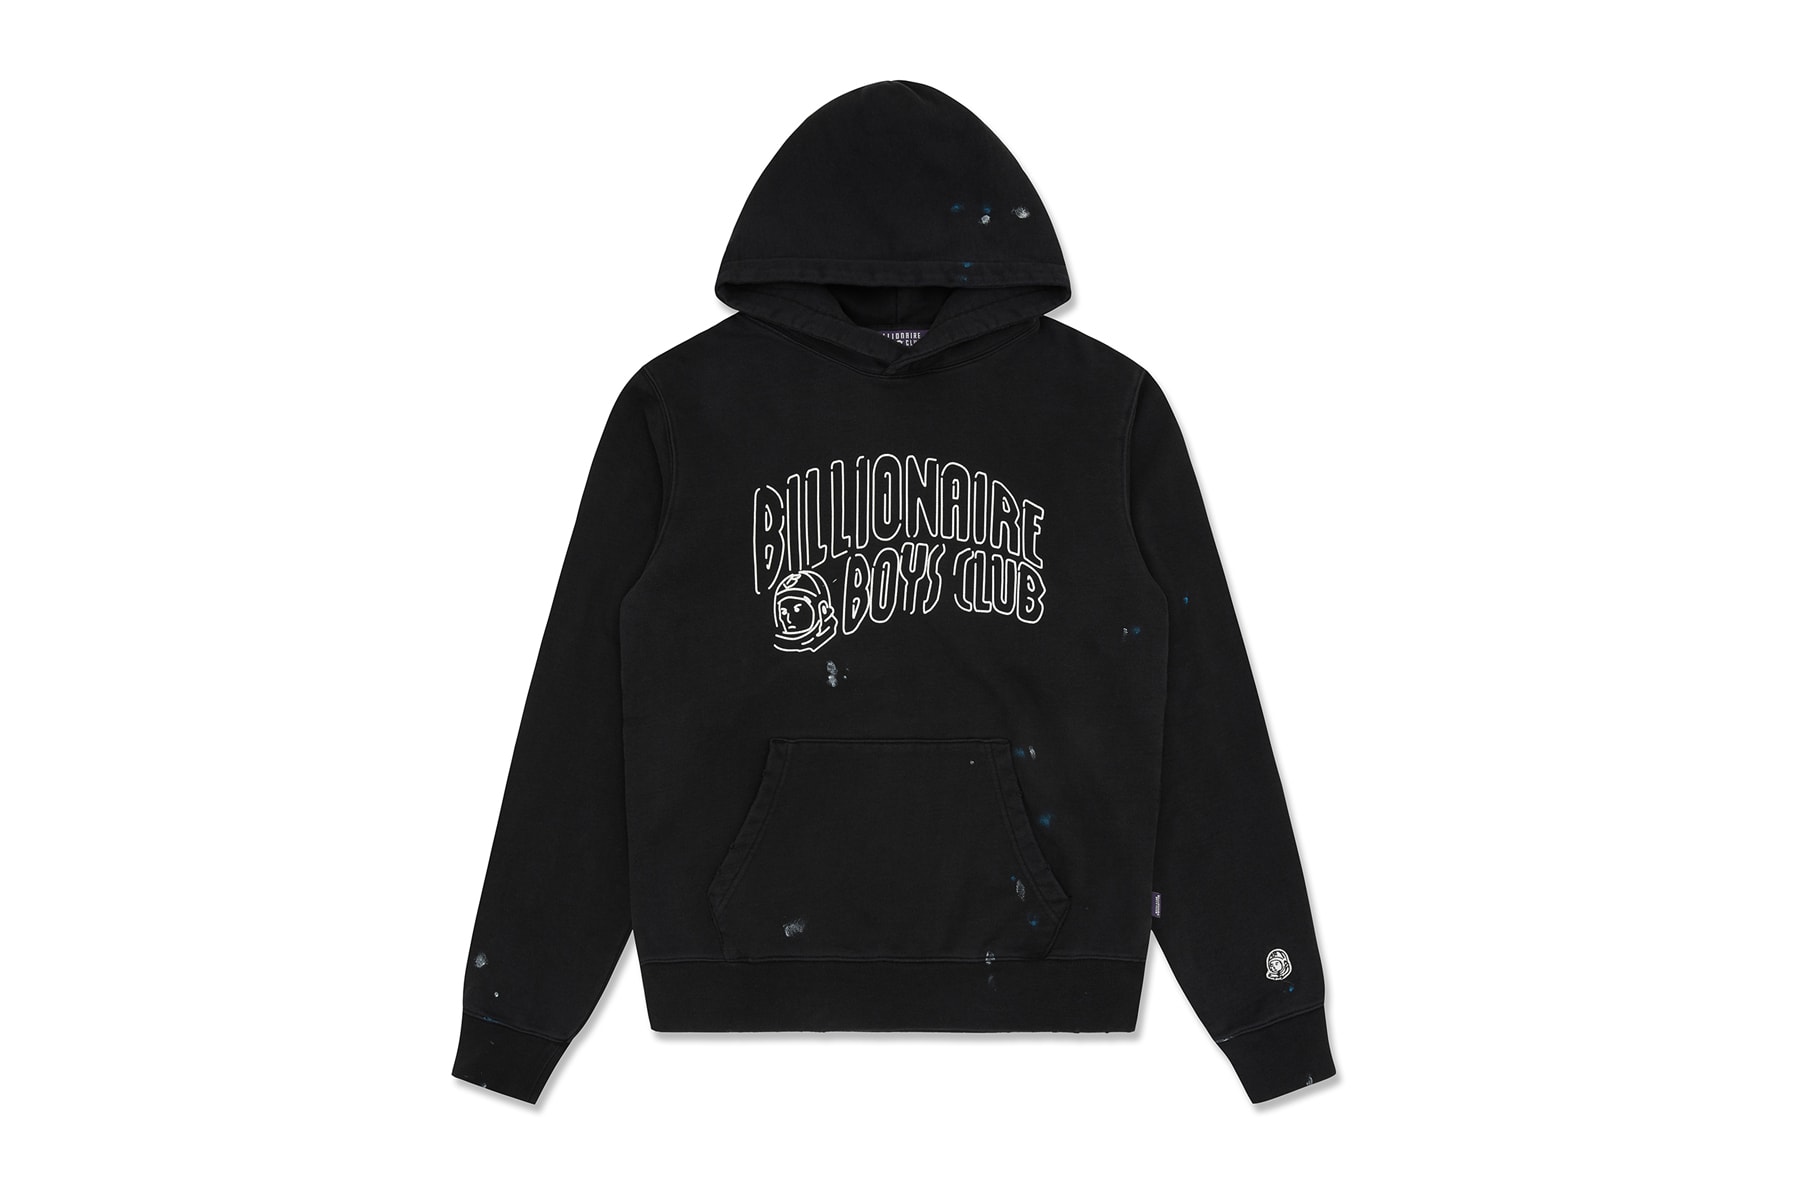 Hamza x Billionaire Boys Club EU Special Capsule release info belgian rapper music smets t-shirts hoodies pharrell williams sk8thing collaborations limited release japan